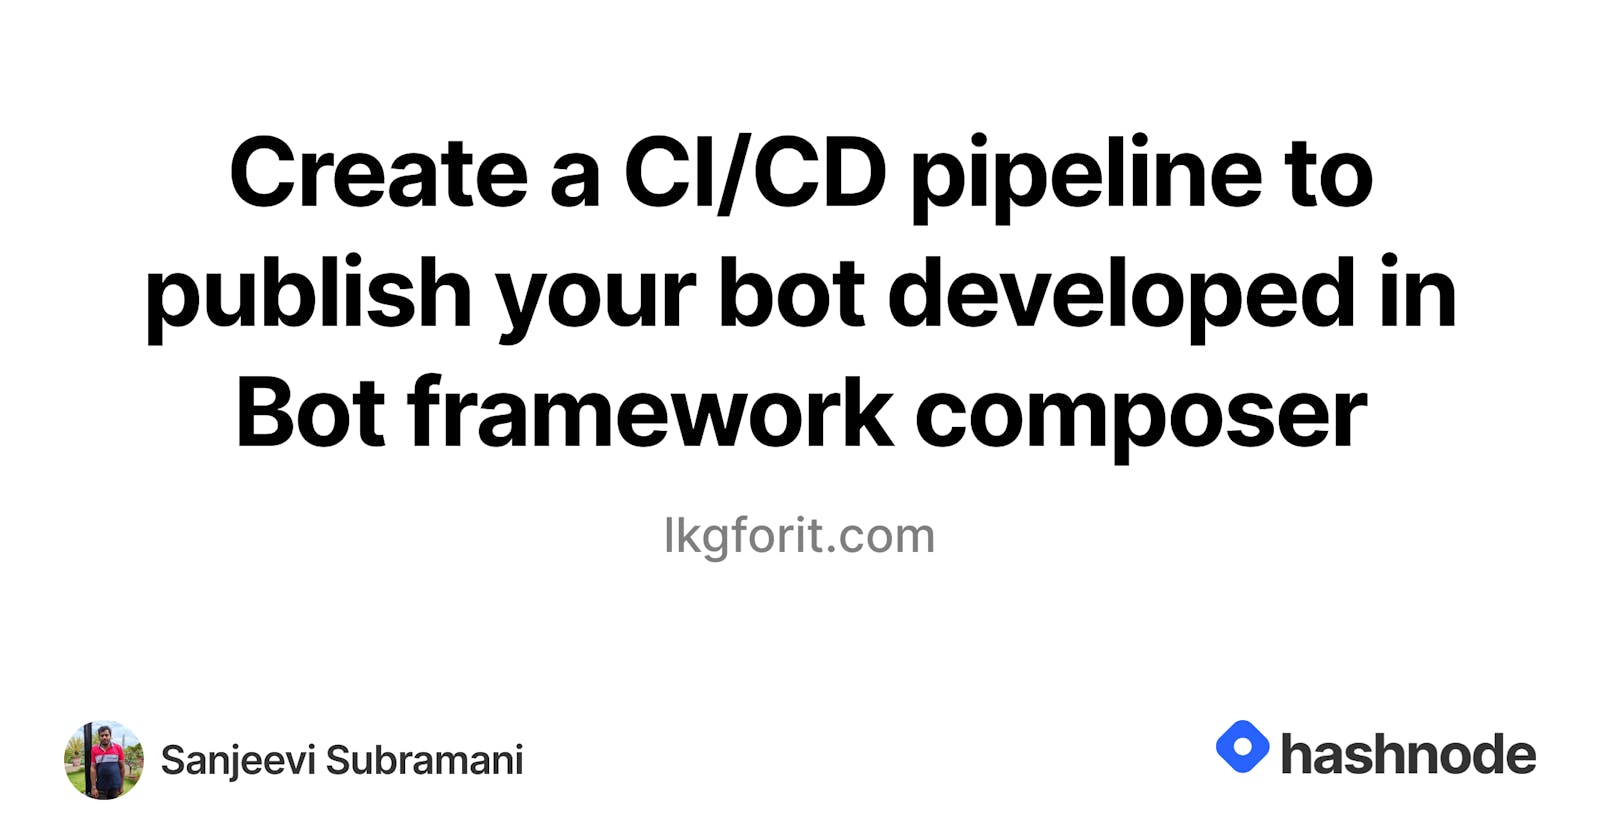 Create a CI/CD pipeline to publish your bot developed in Bot framework composer